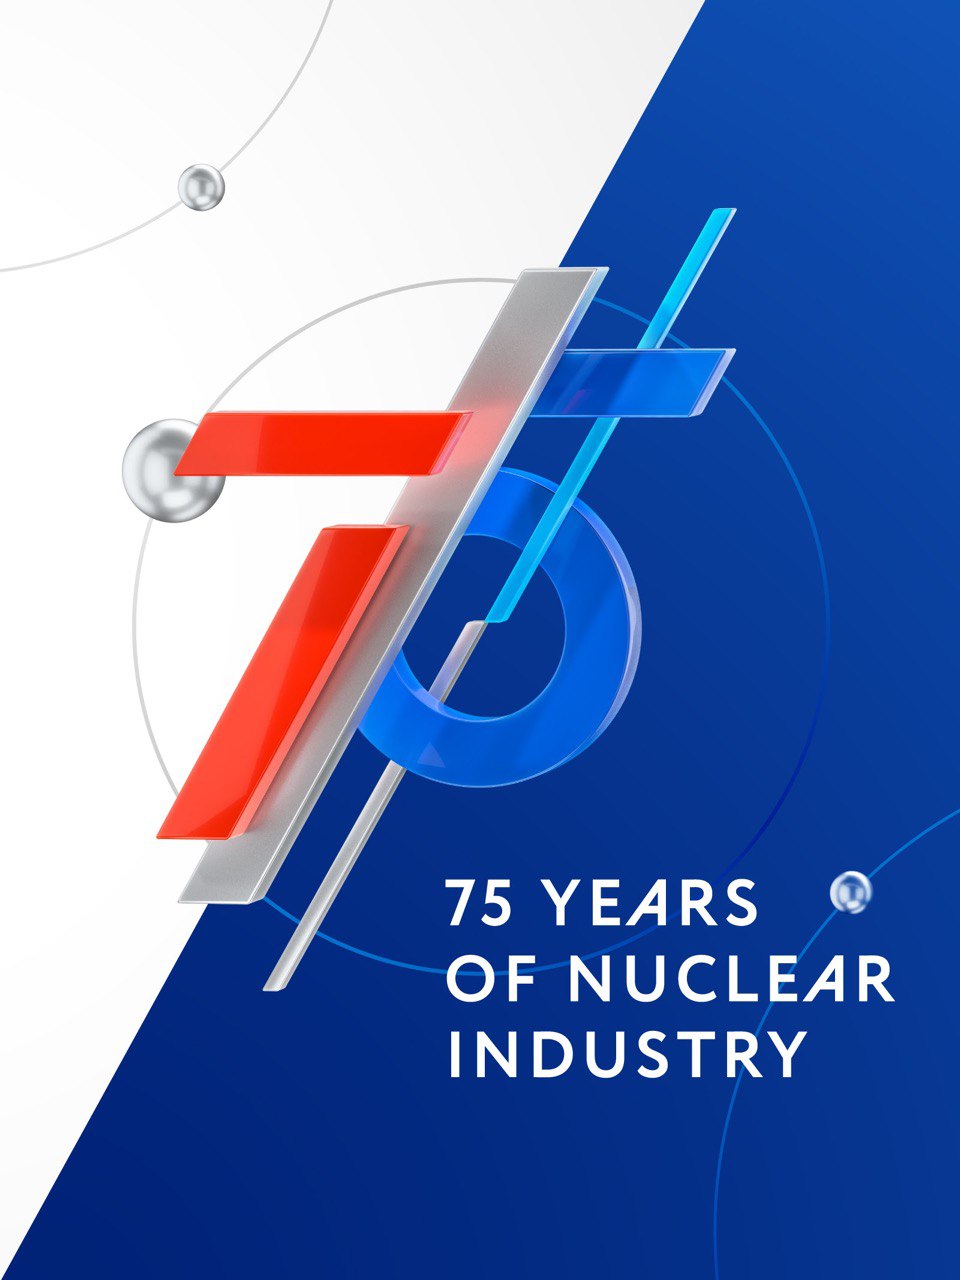 Celebrations dedicated to the 75th anniversary of the country’s nuclear industry will take place in Russia